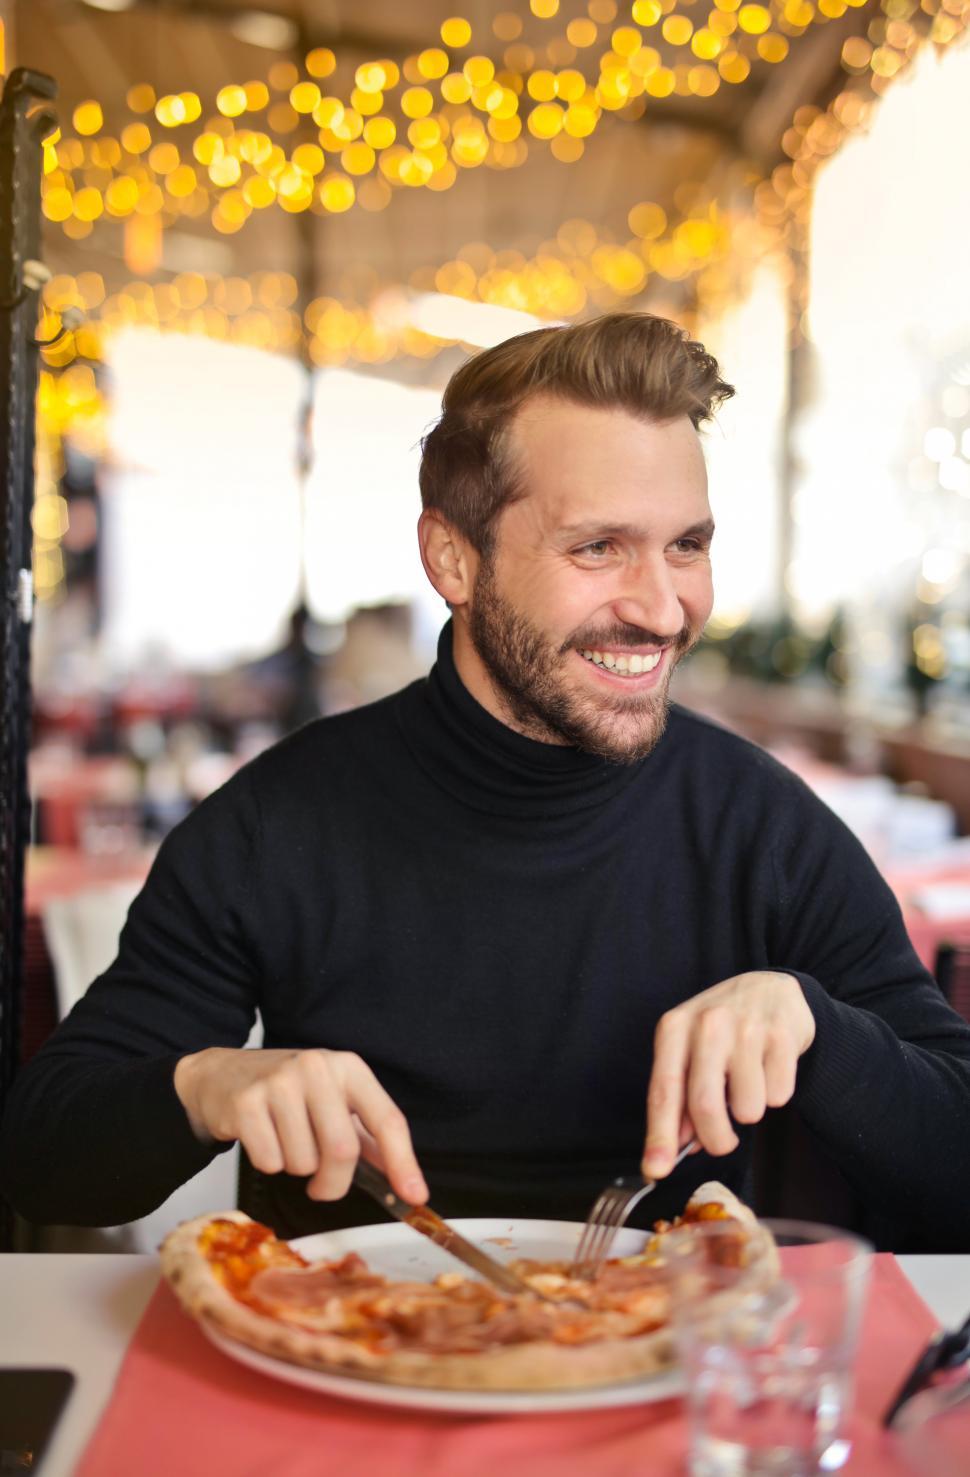 Free Image of Happy young man eating a pizza in restaurant 